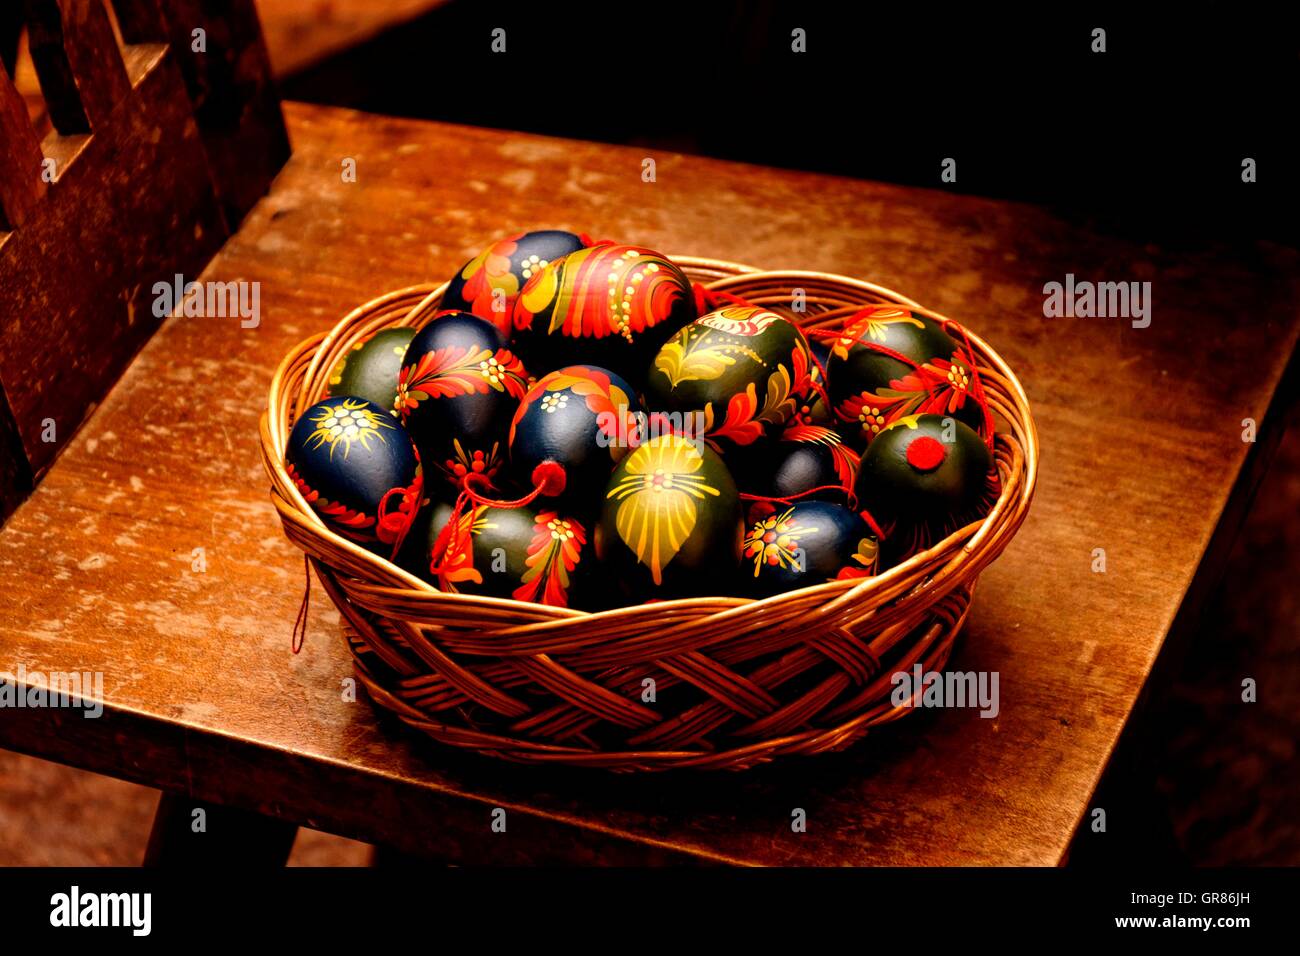 Brightly Painted, Yellow, Red, Black Easter Eggs In Basket Stock Photo